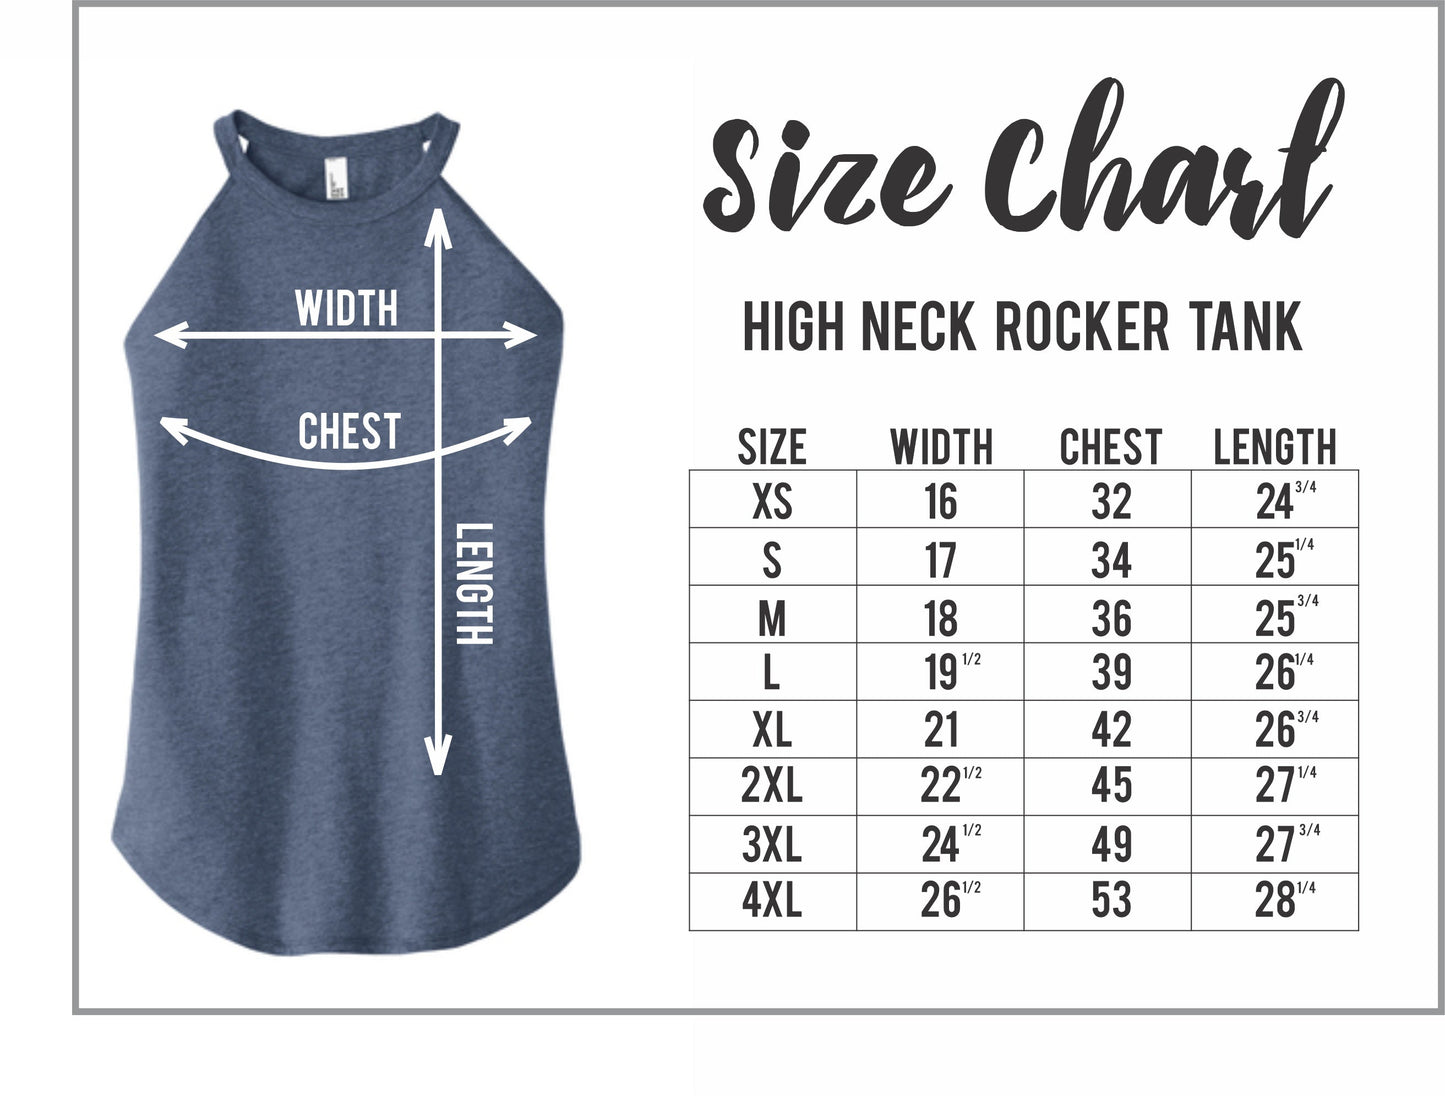 The Second Week Collection - High Neck Rocker Tank